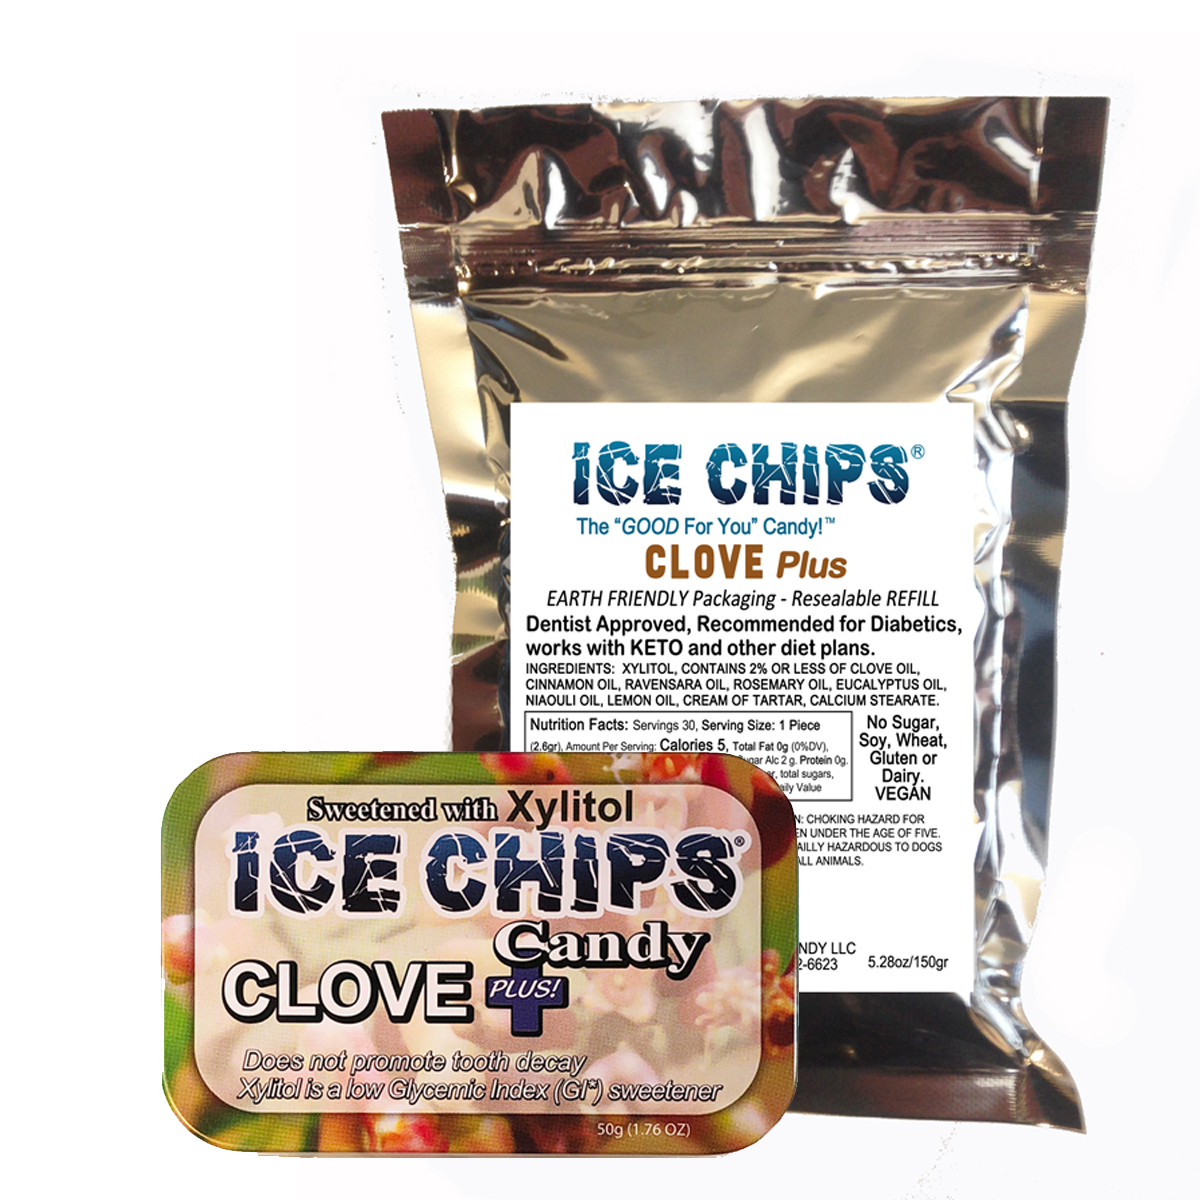 ICE CHIPS® Clove Plus Xylitol Candy